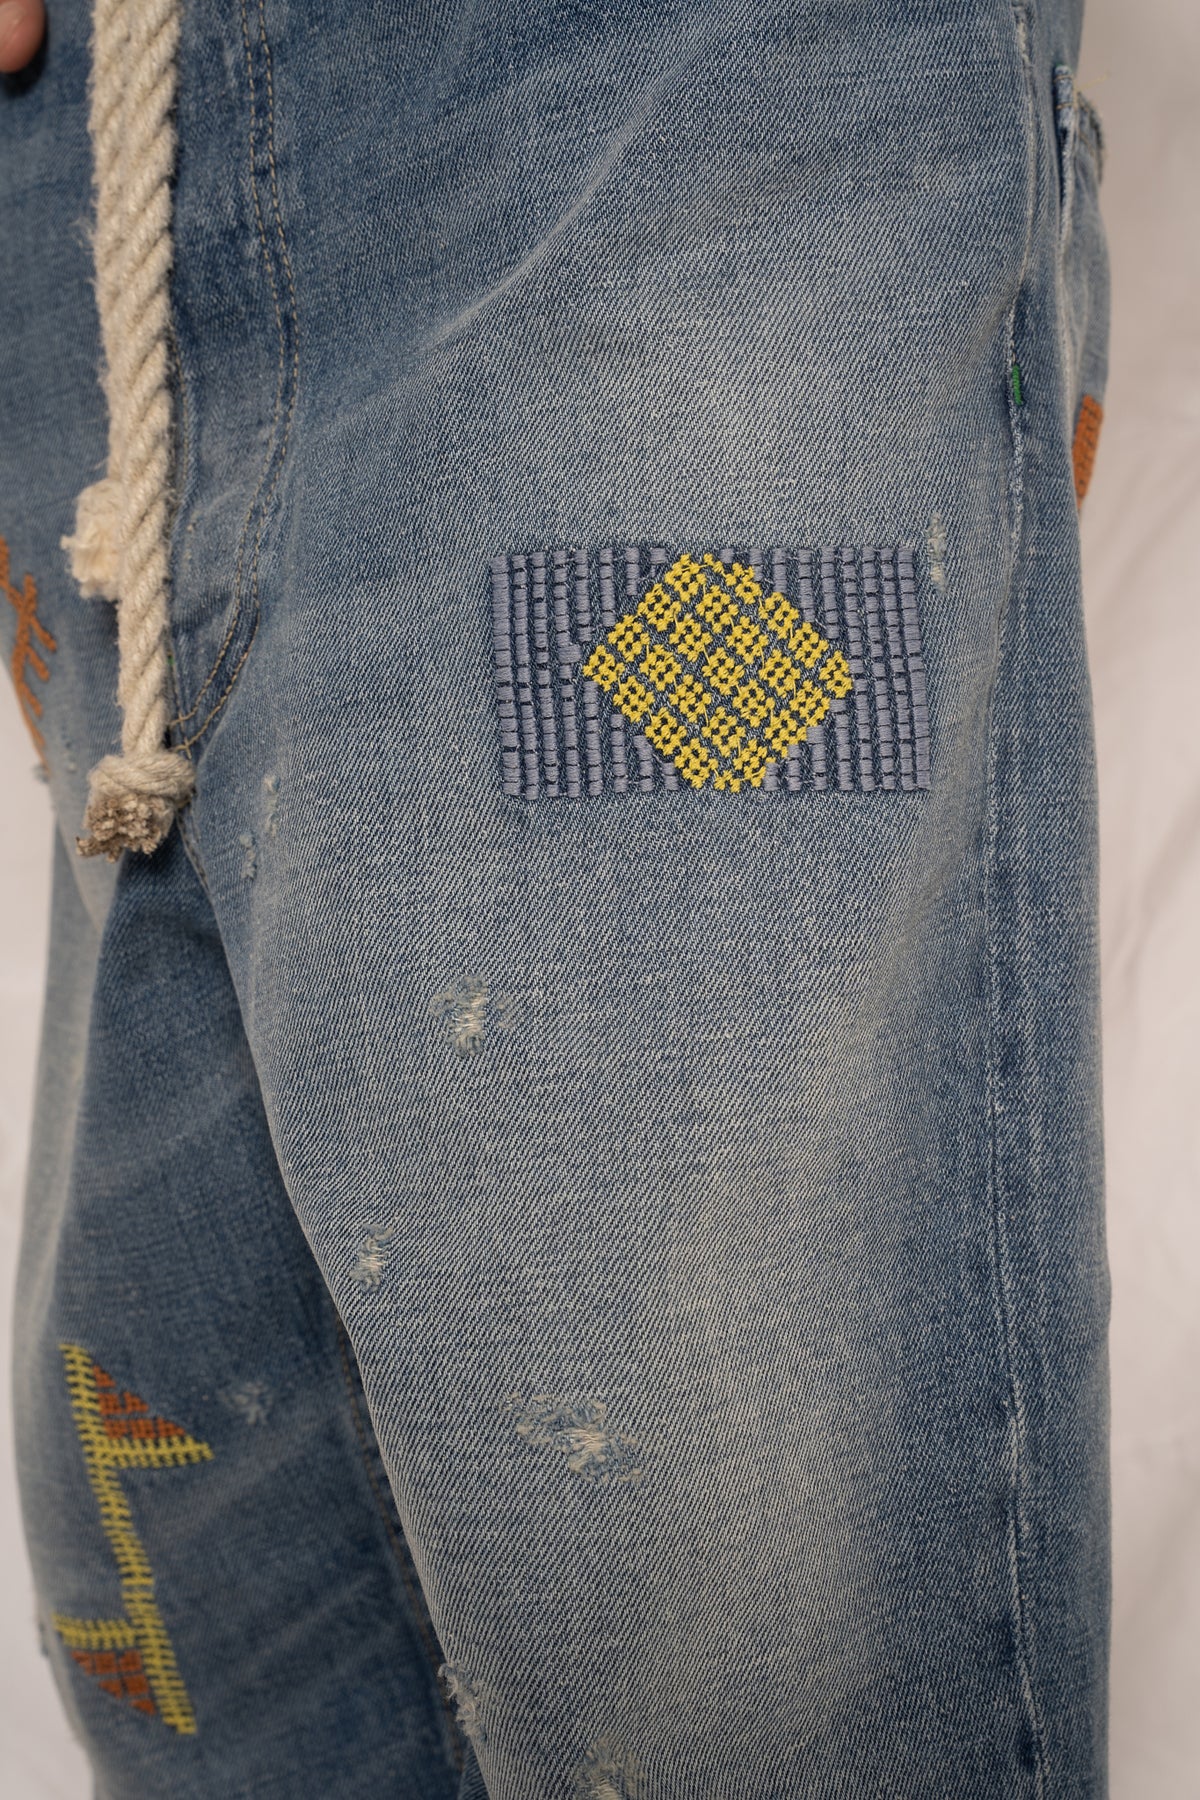 DR. COLLECTORS Embroidered Japanese Denim in Sunfaded Blue M